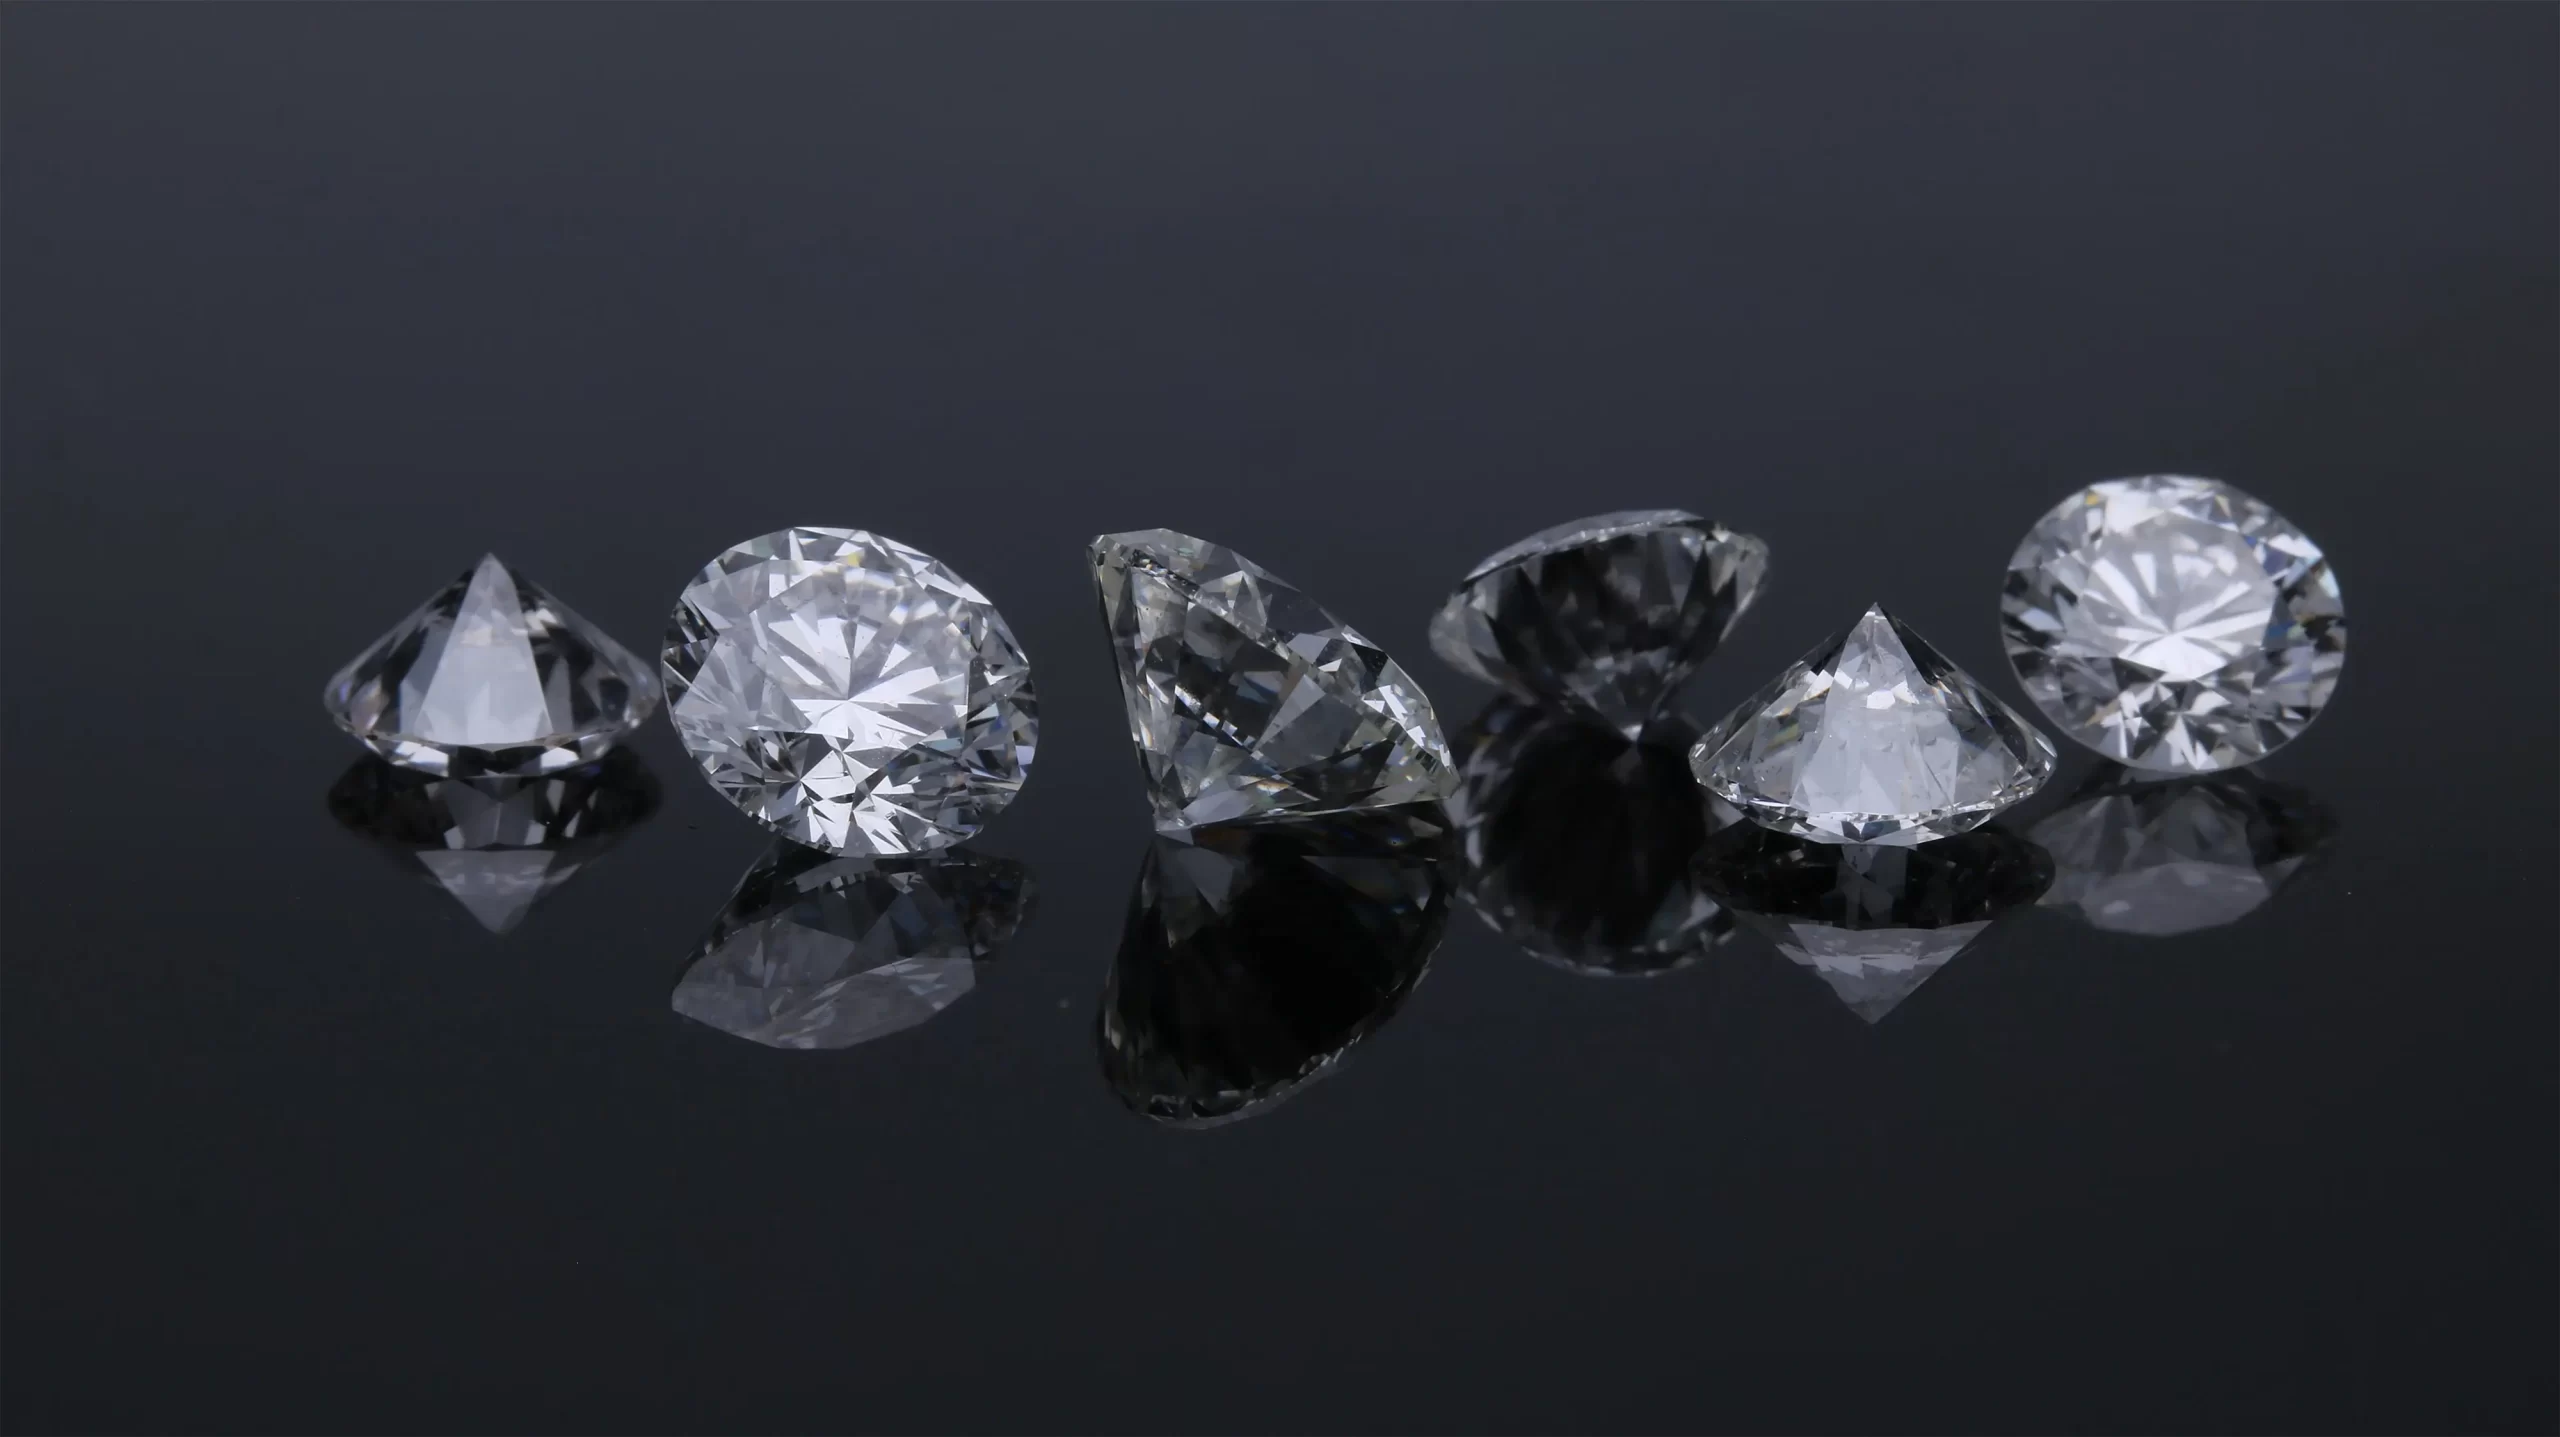 How To Tell If A Diamond Is Real Or Fake  - How To Tell If A Diamond Is Real Or Fake 1 scaled - How To Tell If A Diamond Is Real Or Fake